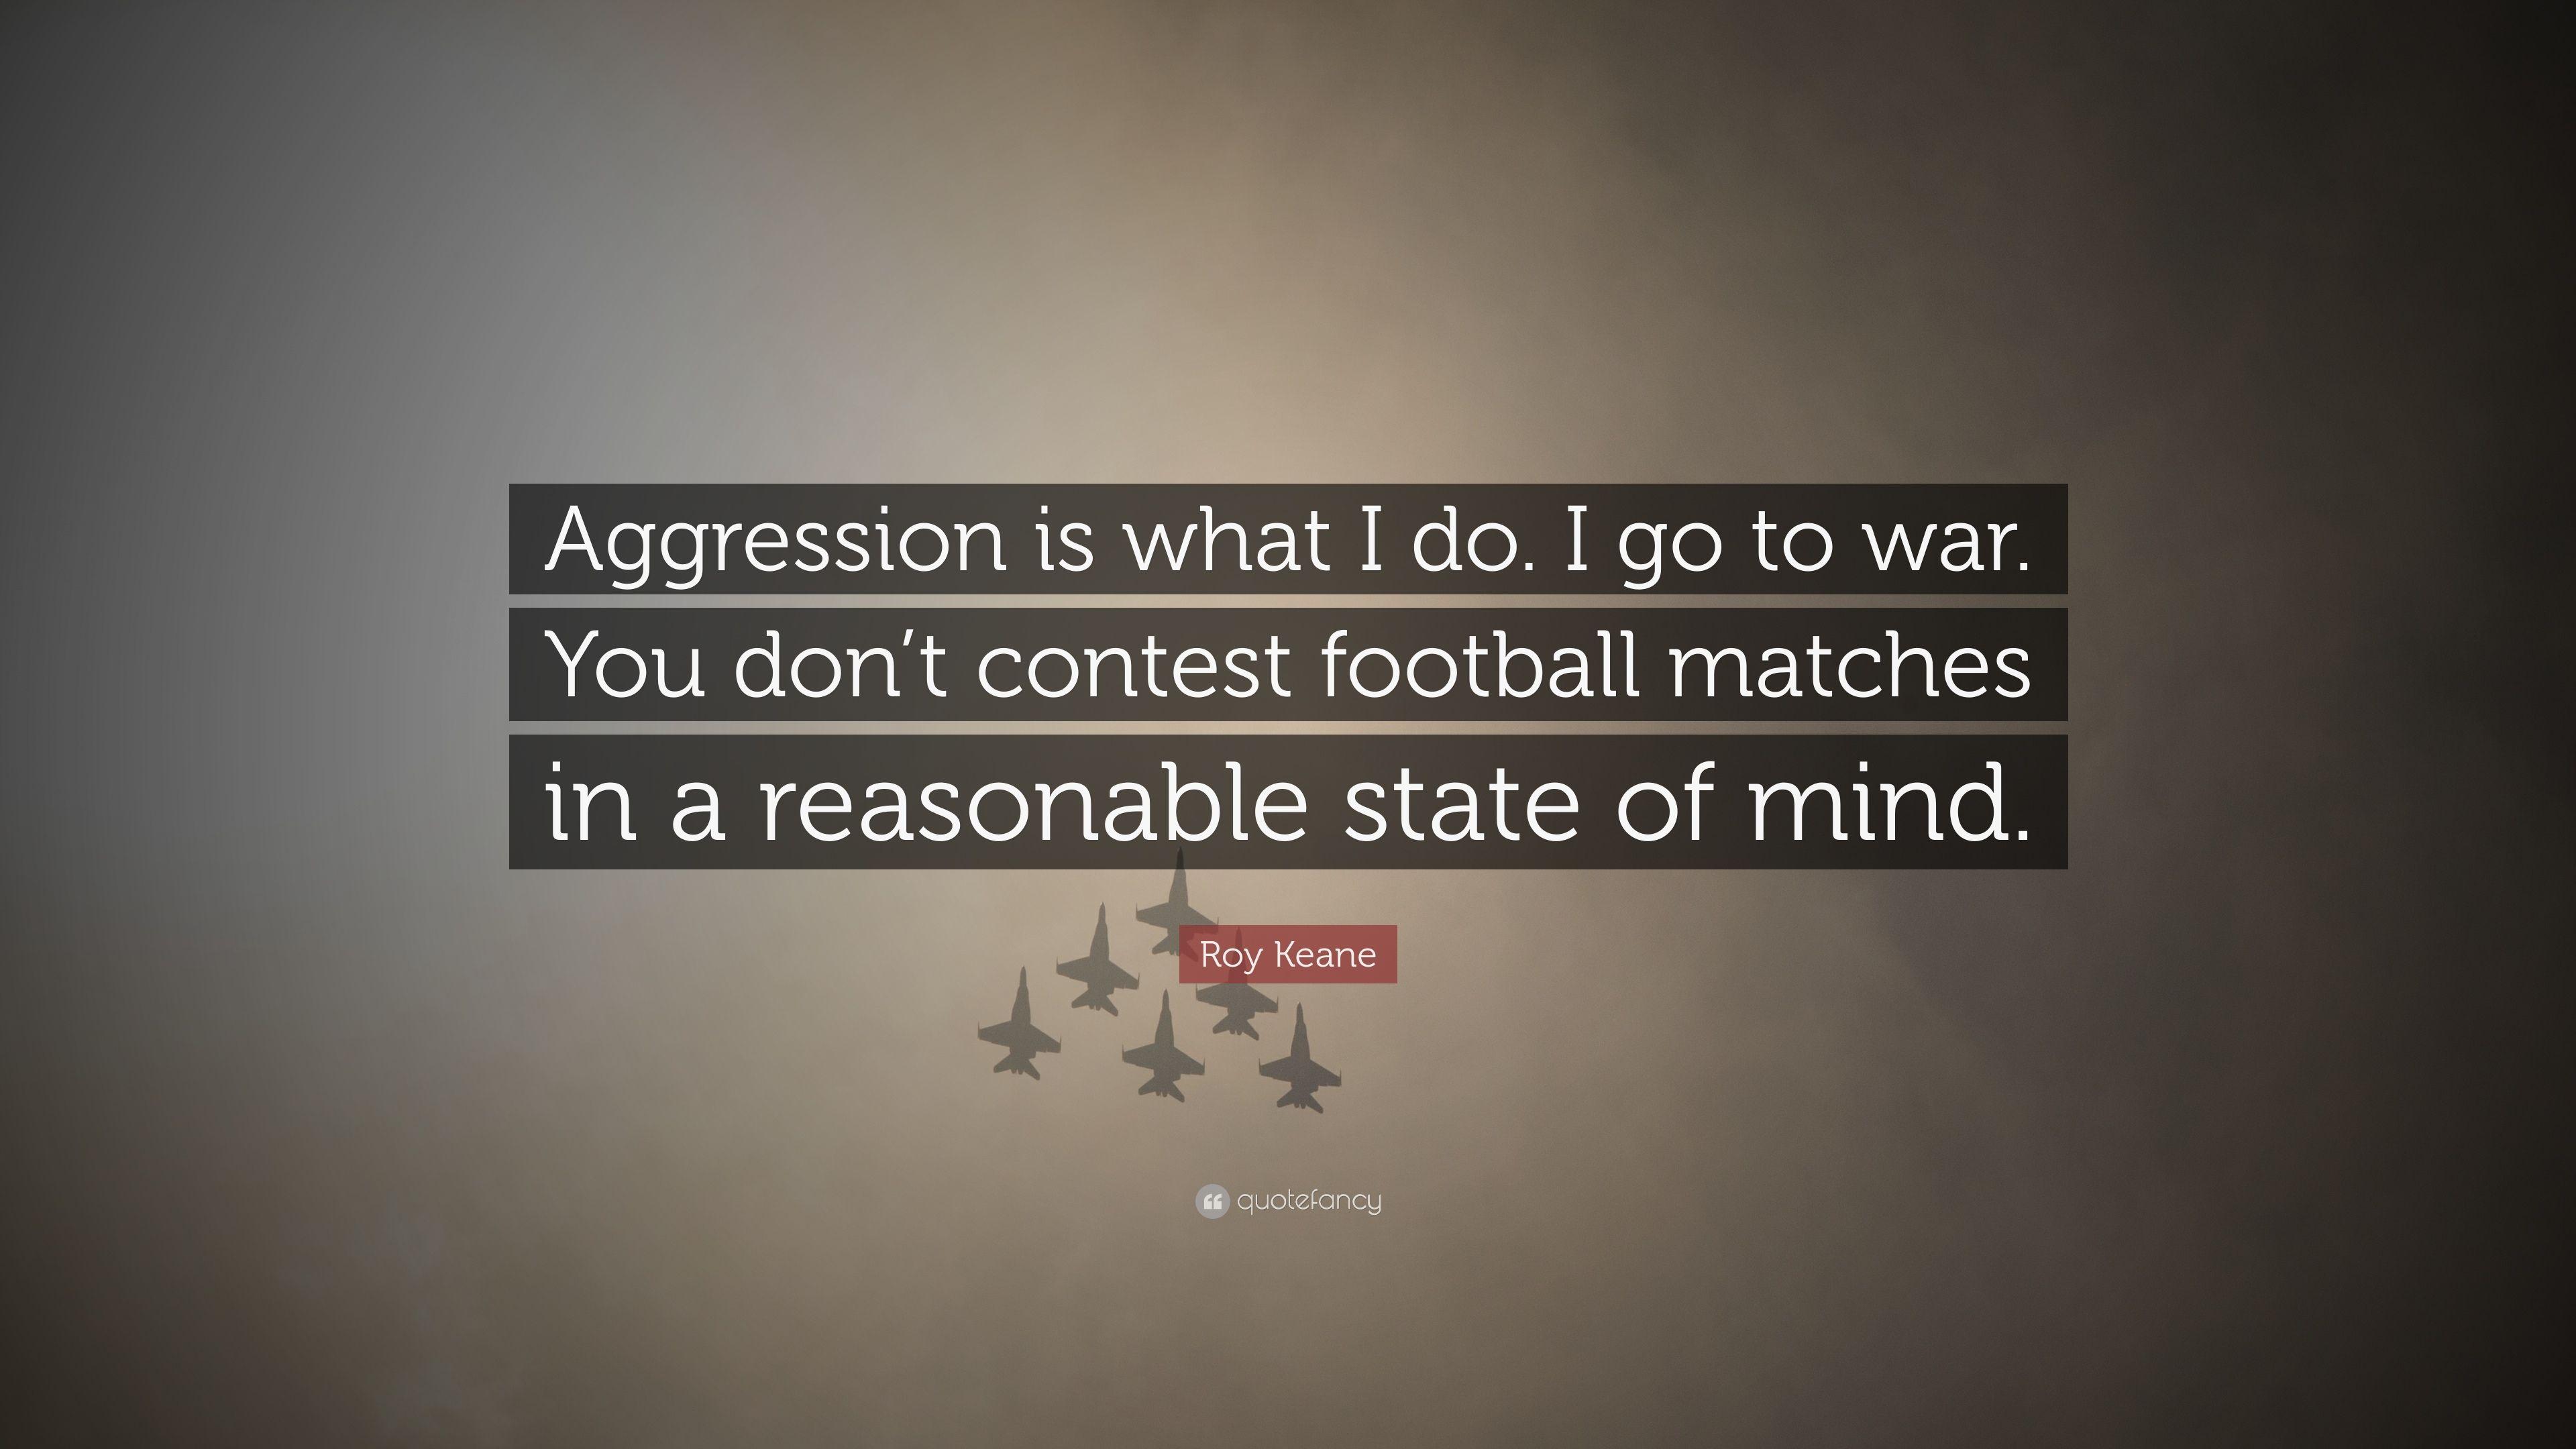 Roy Keane Quote: “Aggression is what I do. I go to war. You don't